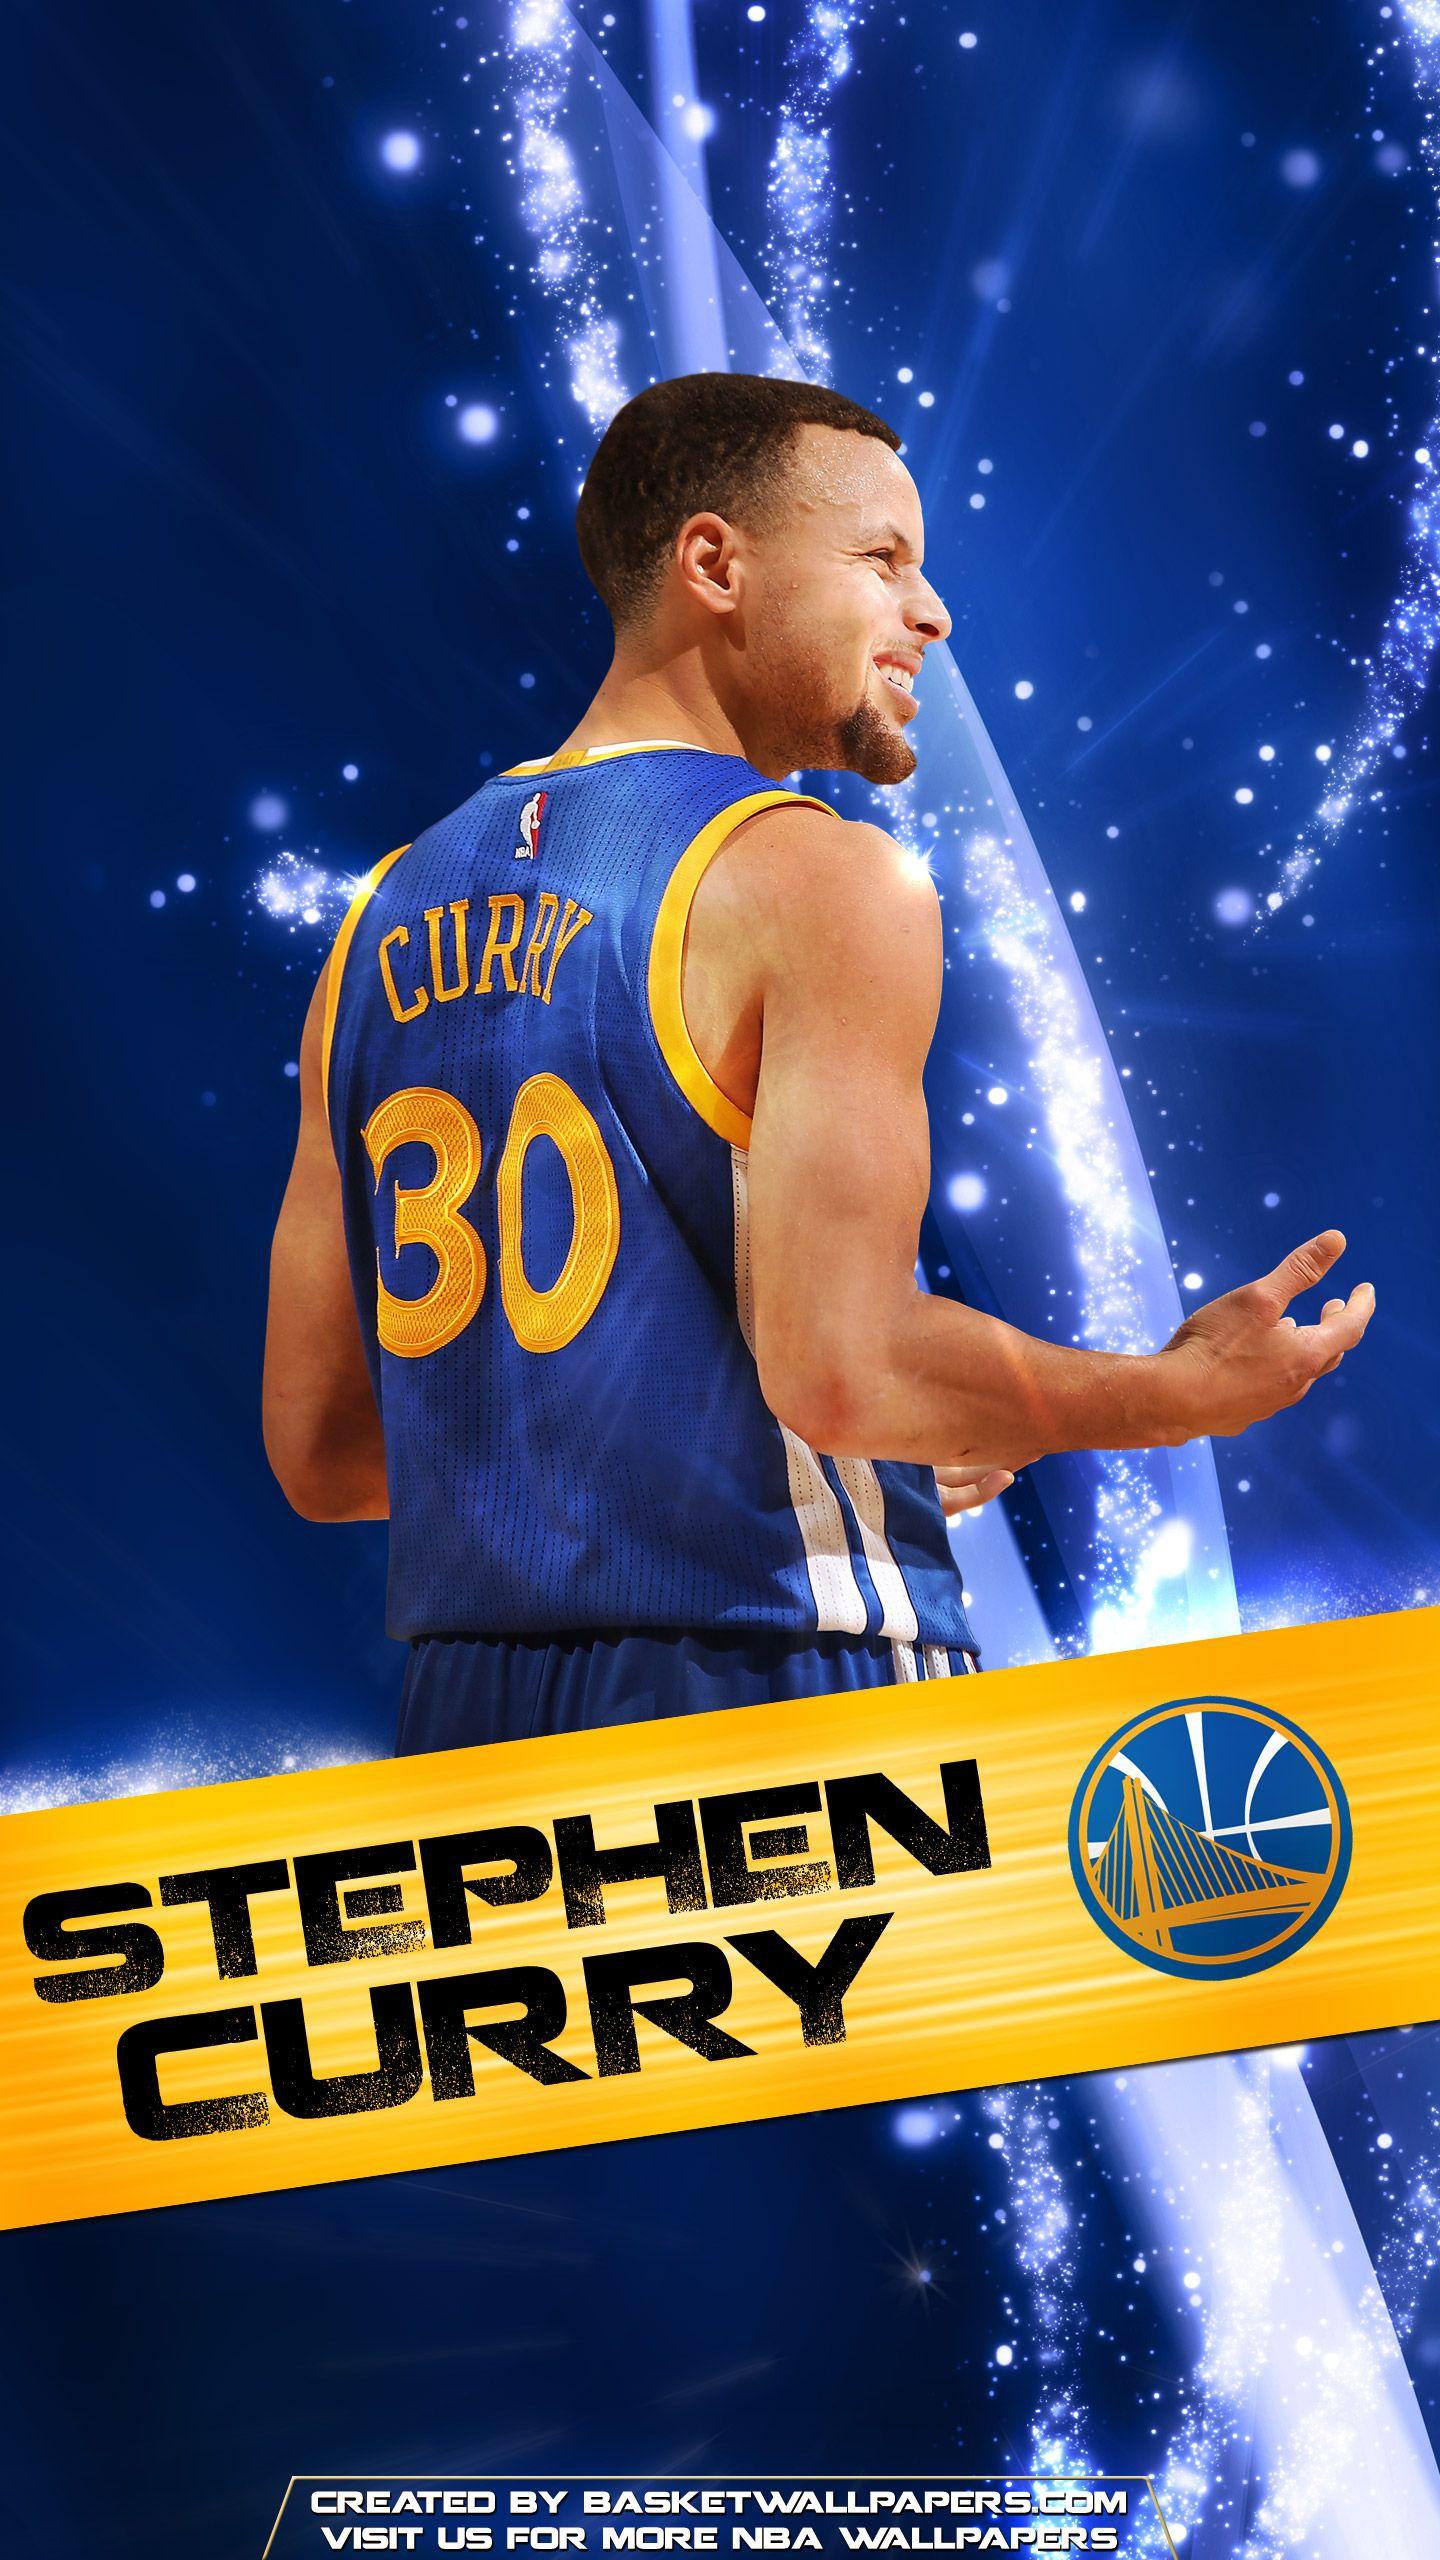 Stephen Curry Wallpaper for iPhone Wallpaper HD. Stephen curry wallpaper, Curry wallpaper, Nba stephen curry